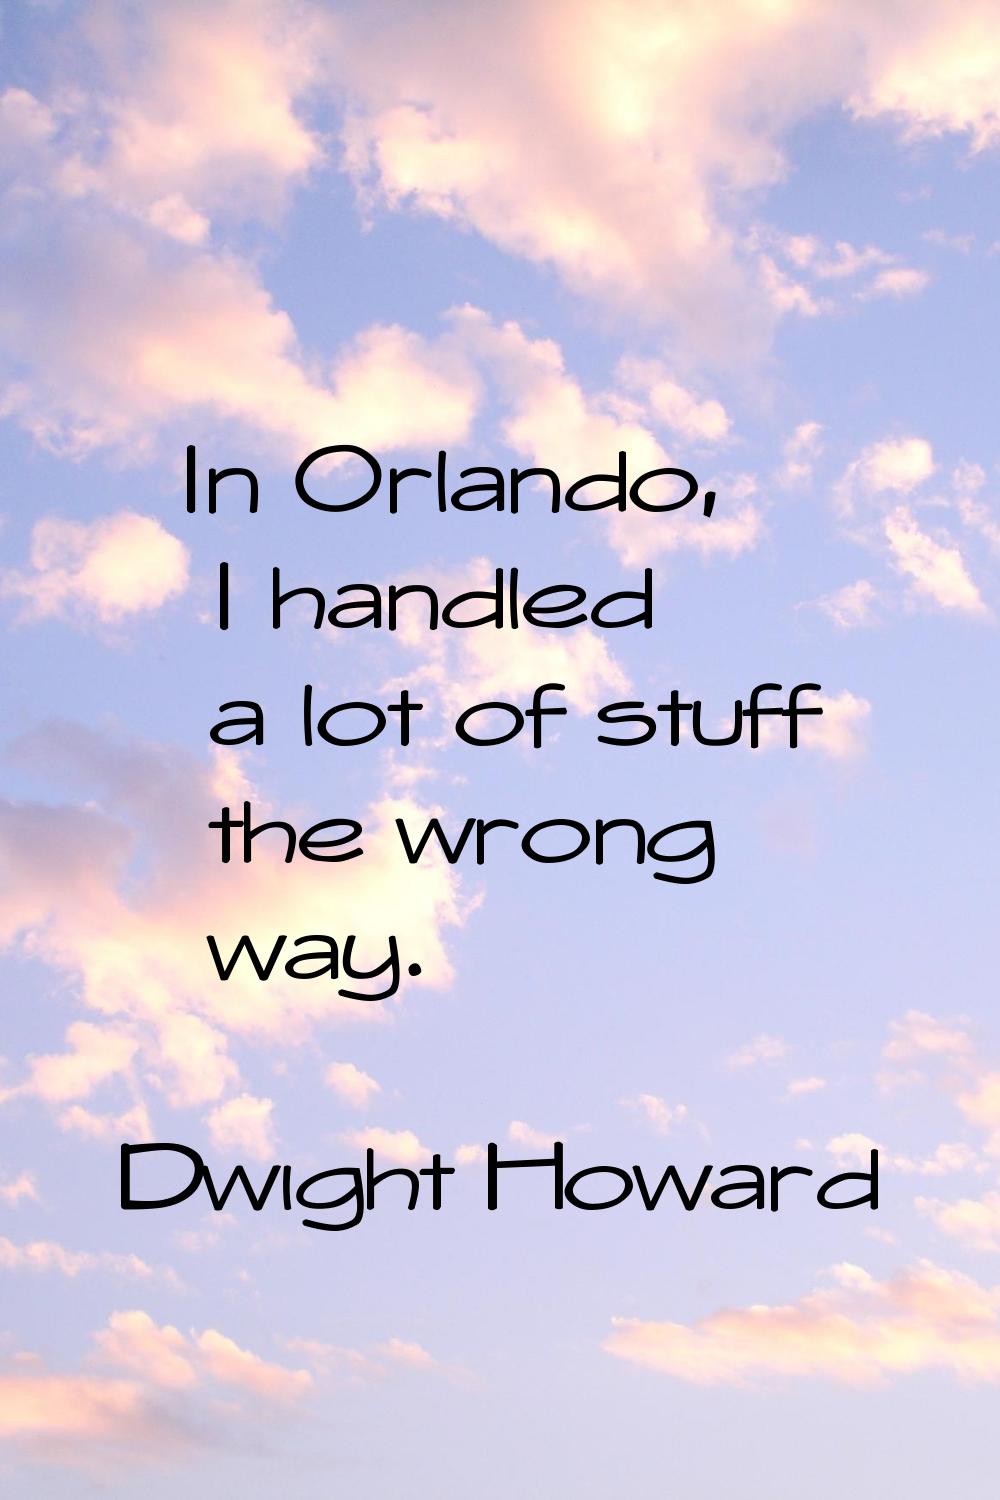 In Orlando, I handled a lot of stuff the wrong way.